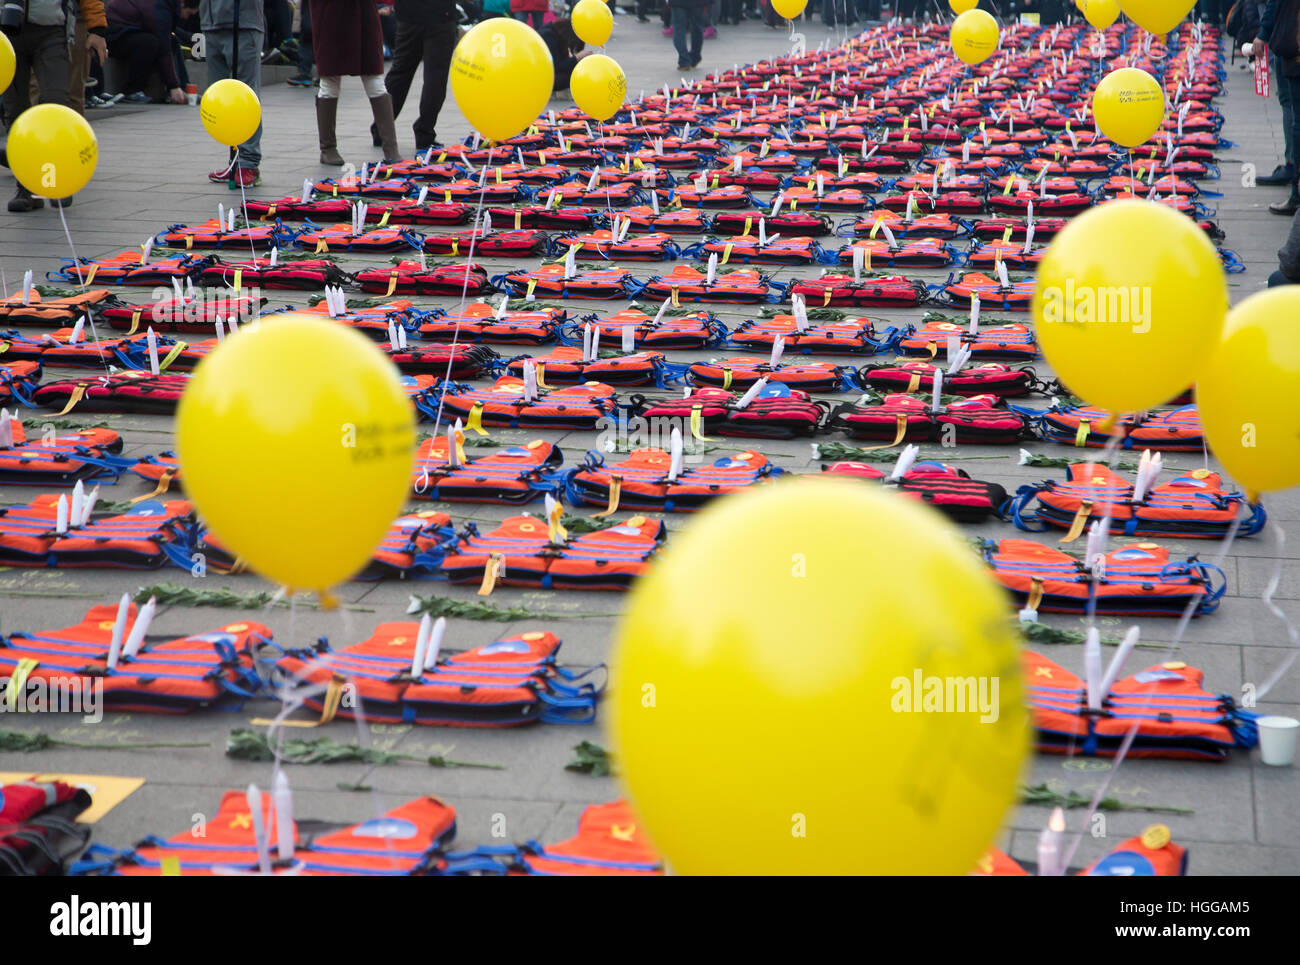 South Korea Politics, Jan 7, 2017 : Life vests are displayed to mourn over the victims of the Sewol Ferry disaster during a rally in Seoul, South Korea. About 600,000 people on Saturday participated in a rally in Seoul, held over an influence-peddling scandal centered on Park and her long-time friend Choi Soon-Sil. Park and Choi allegedly extracted US$64.7 million from conglomerates to set up private foundations controlled by Choi. People demanded President Park to step down during a rally, which was held also to mourn over the 1,000th day of the Sewol Ferry disaster on April 16, 2014, which f Stock Photo